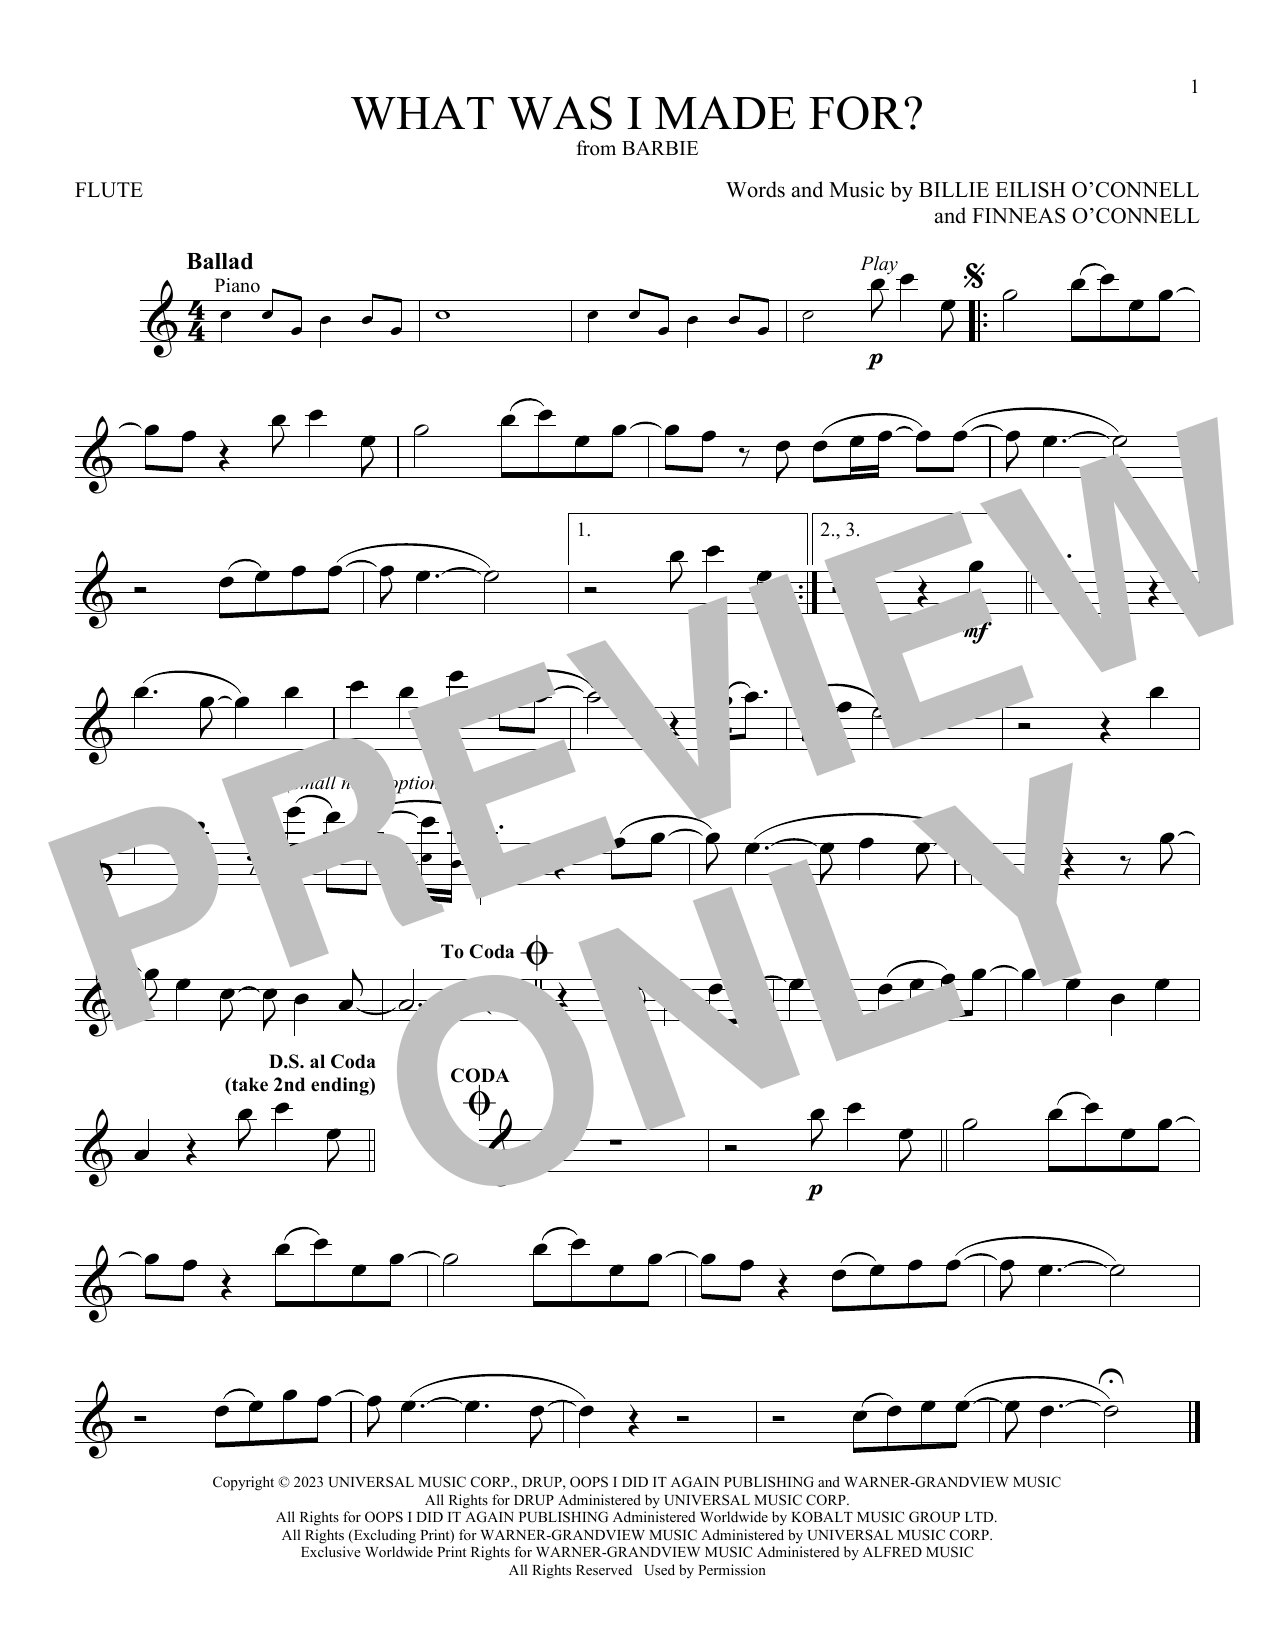 Billie Eilish What Was I Made For? (from Barbie) sheet music notes printable PDF score